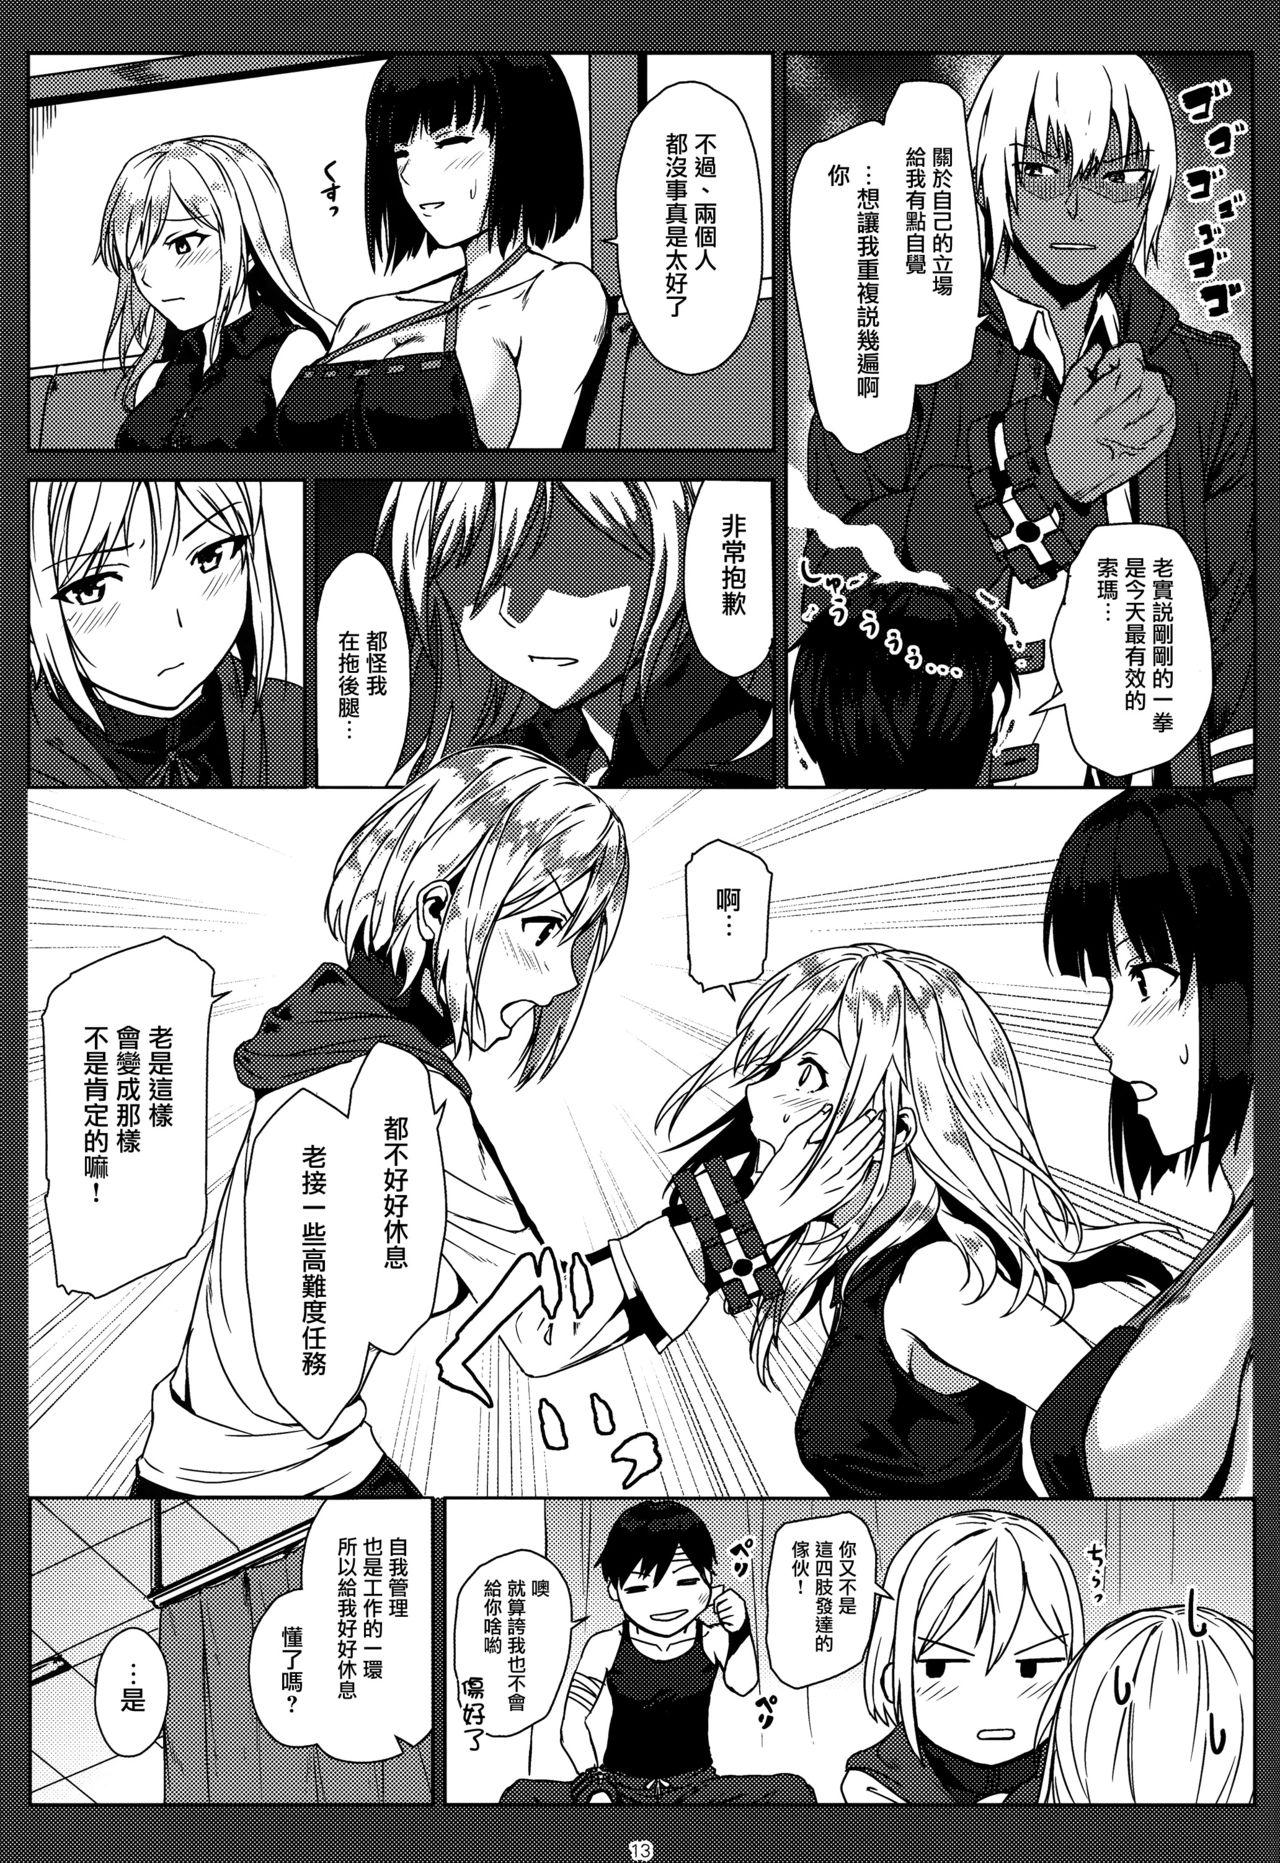 Best Blowjob Again #3 All That Heaven Allows - God eater Vietnamese - Page 12